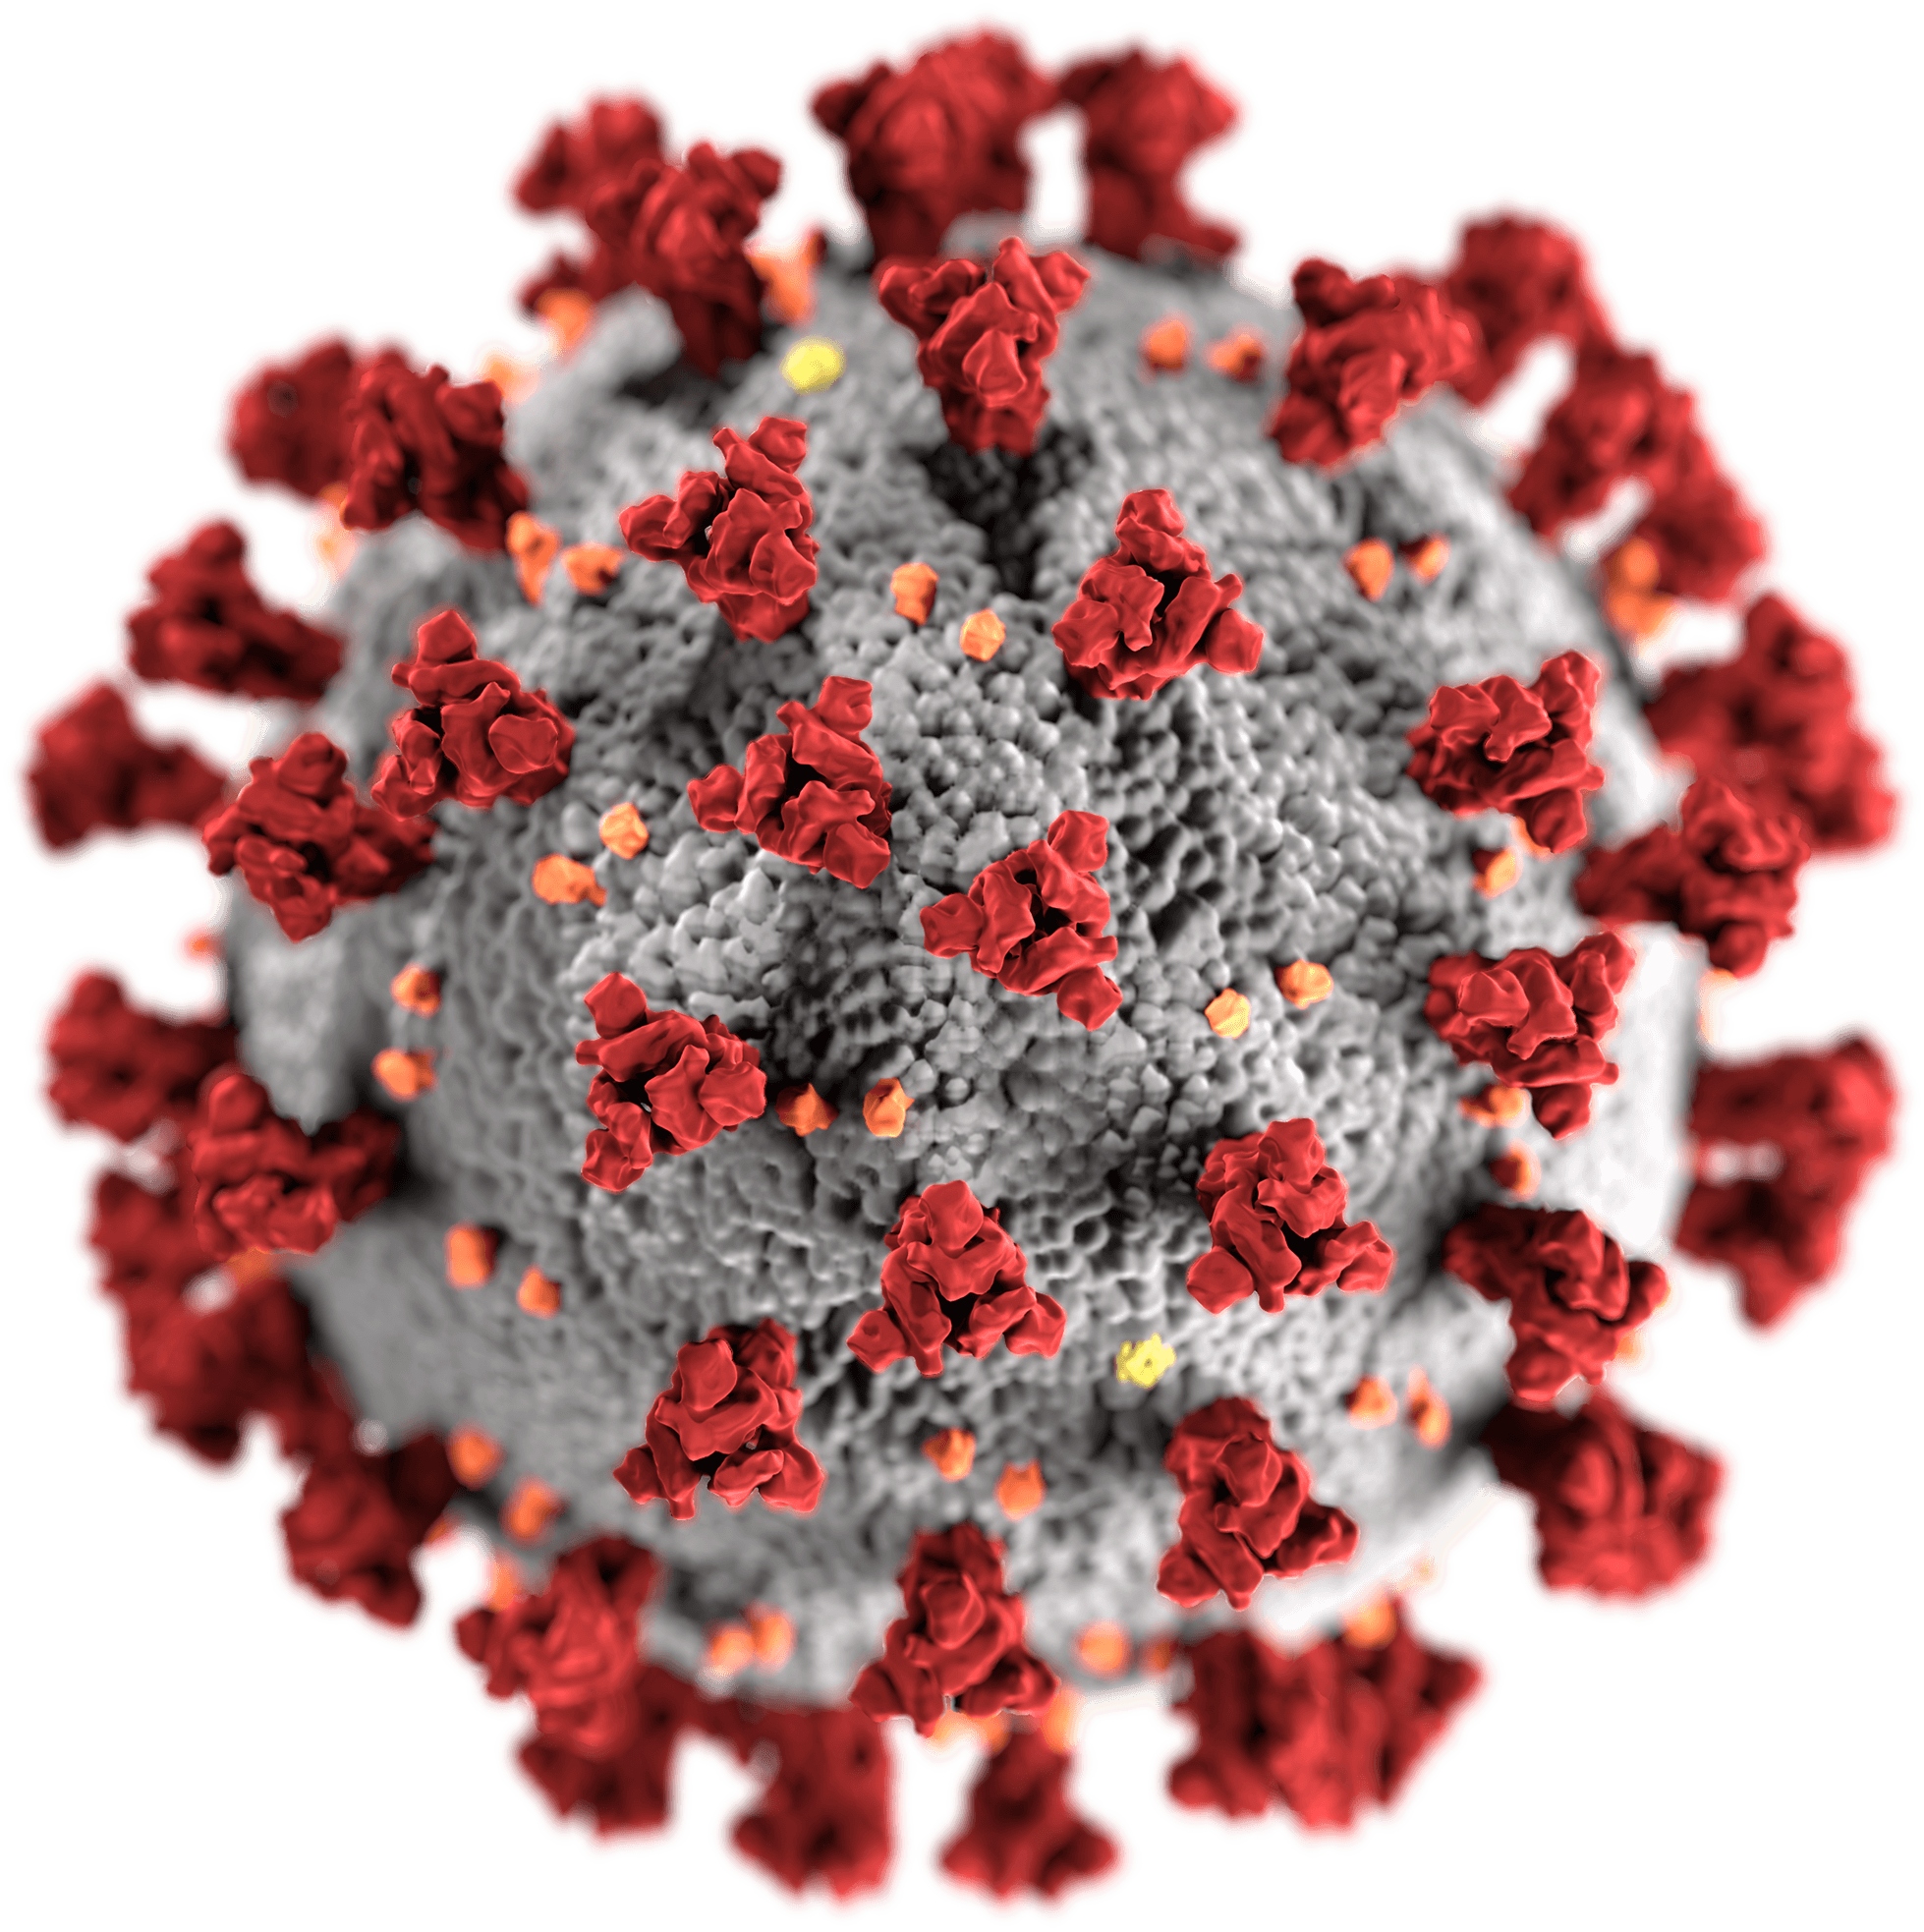 Illustration of the morphology of coronaviruses; the club-shaped viral spike peplomers, coloured red, create the look of a corona surrounding the virion, when observed with an electron microscope